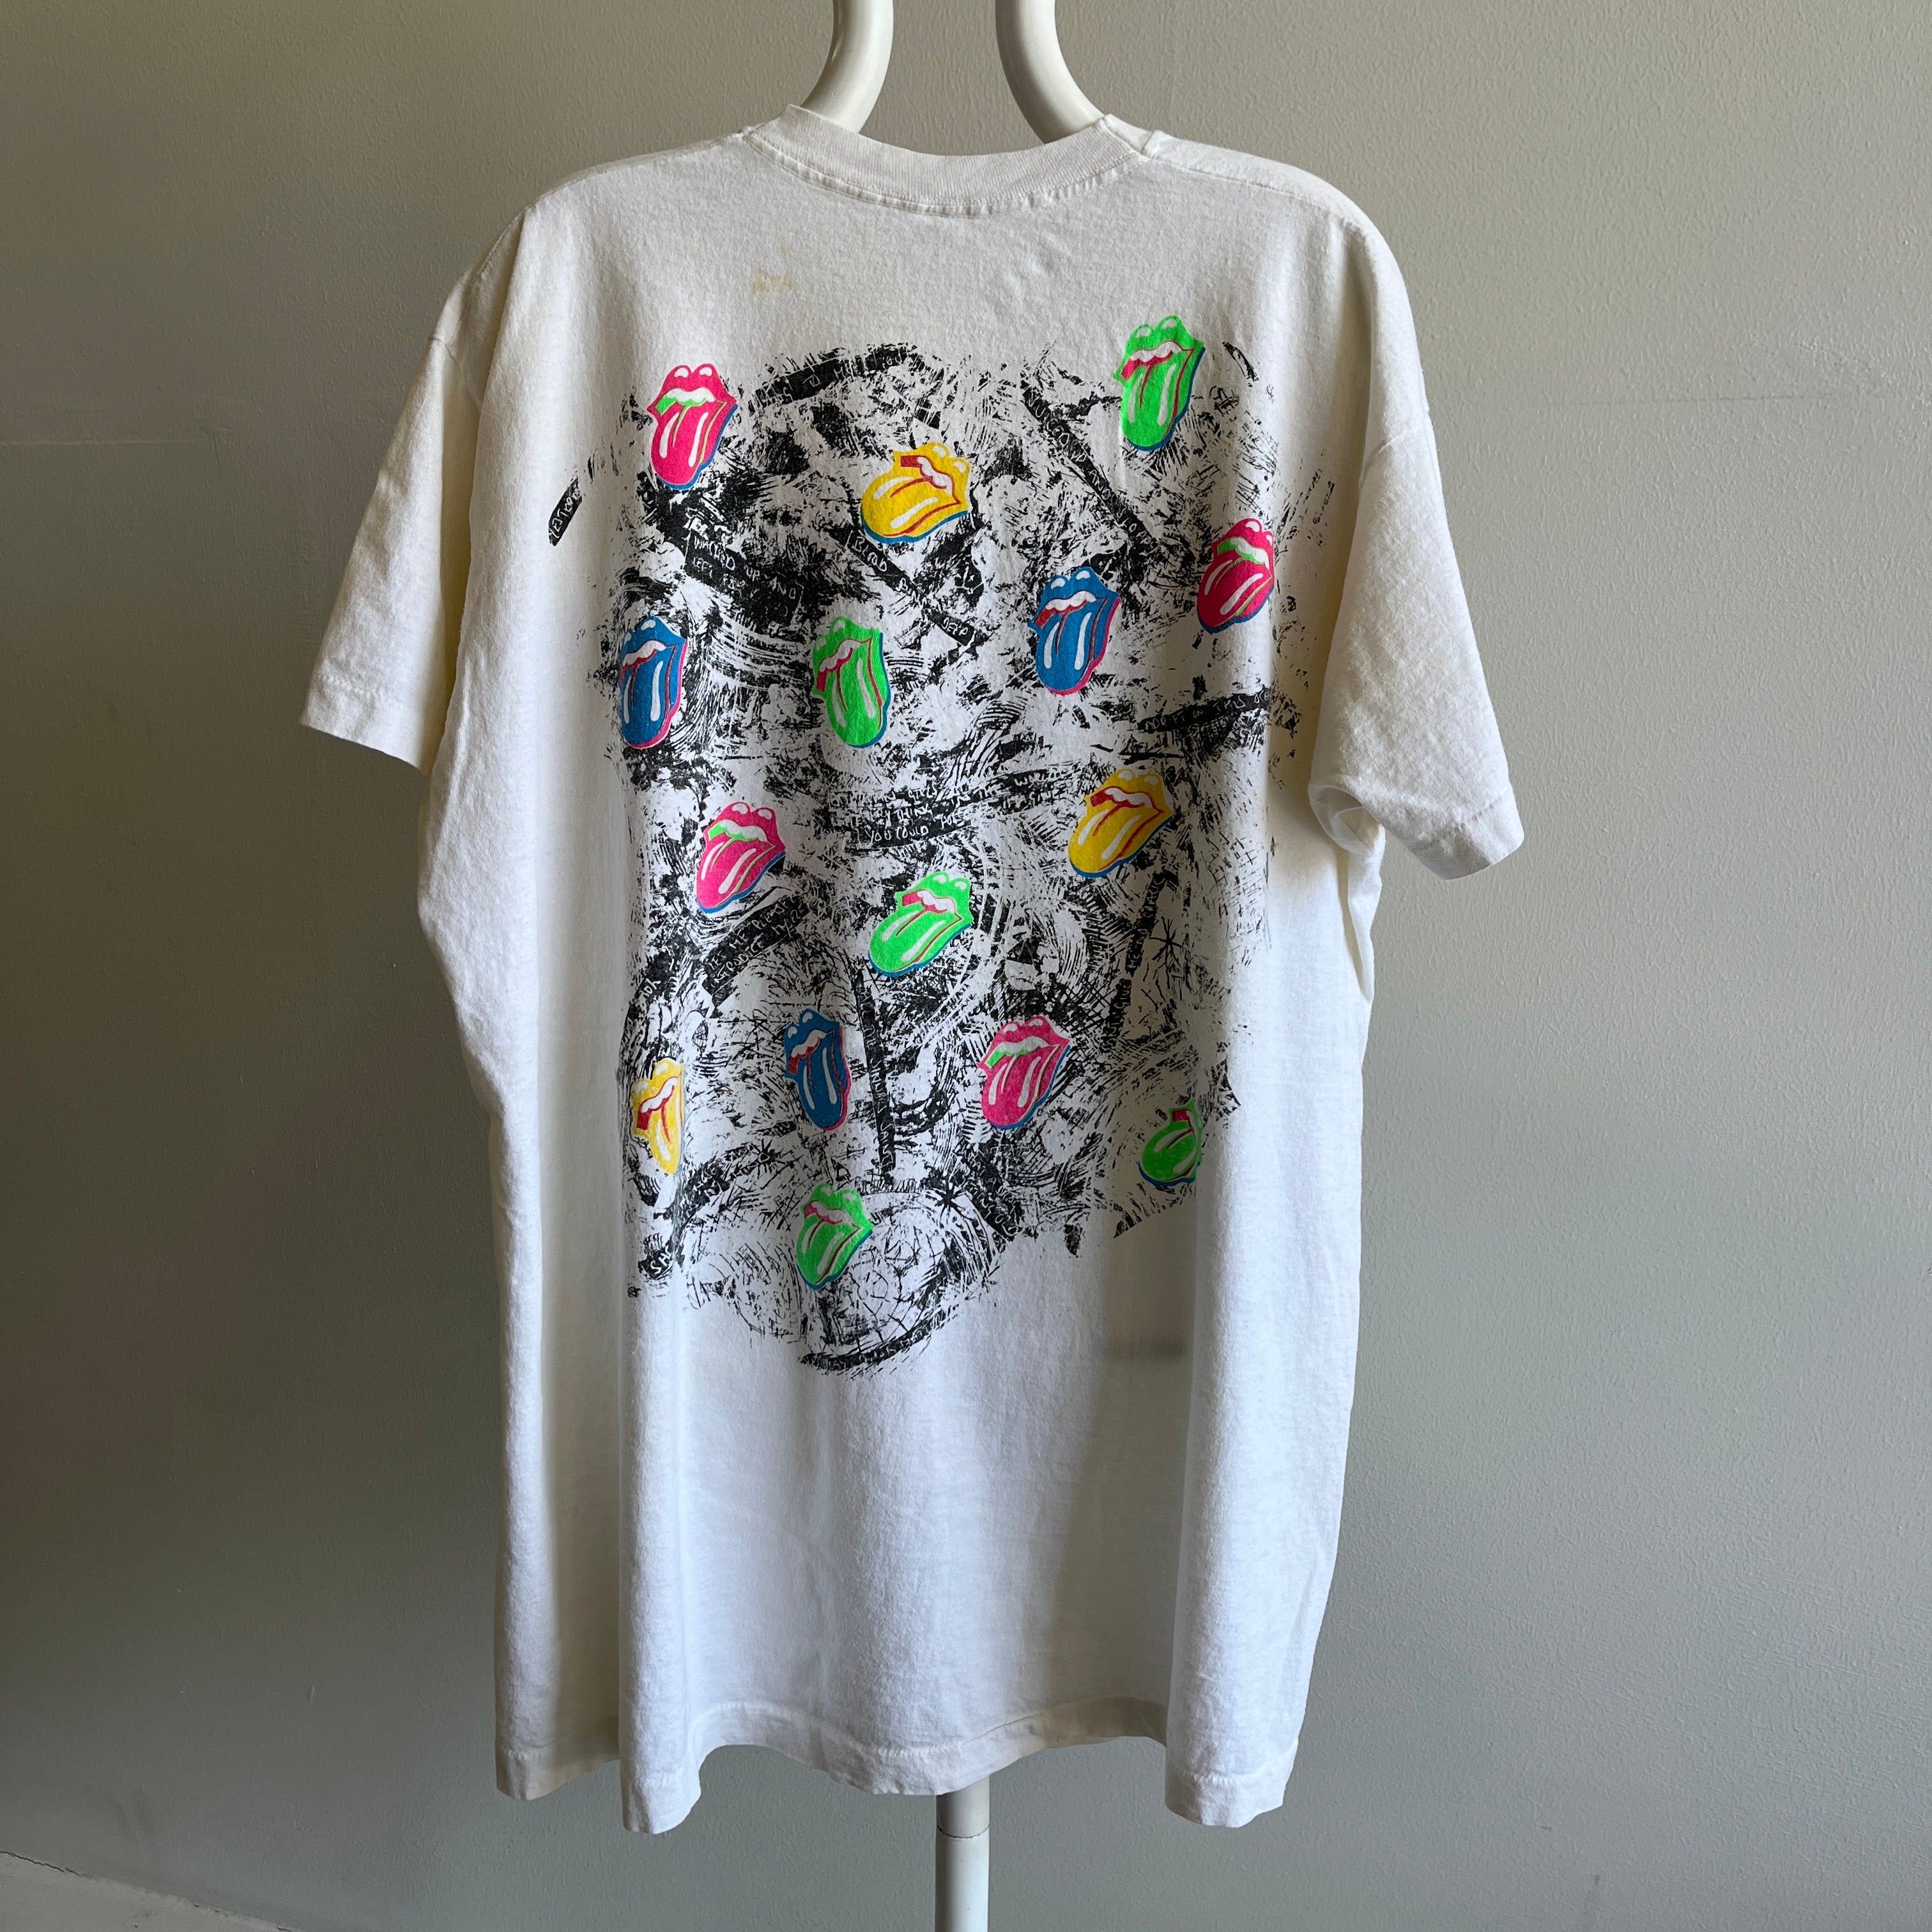 1989 Rolling Stones Tour T-Shirt by Screen Stars